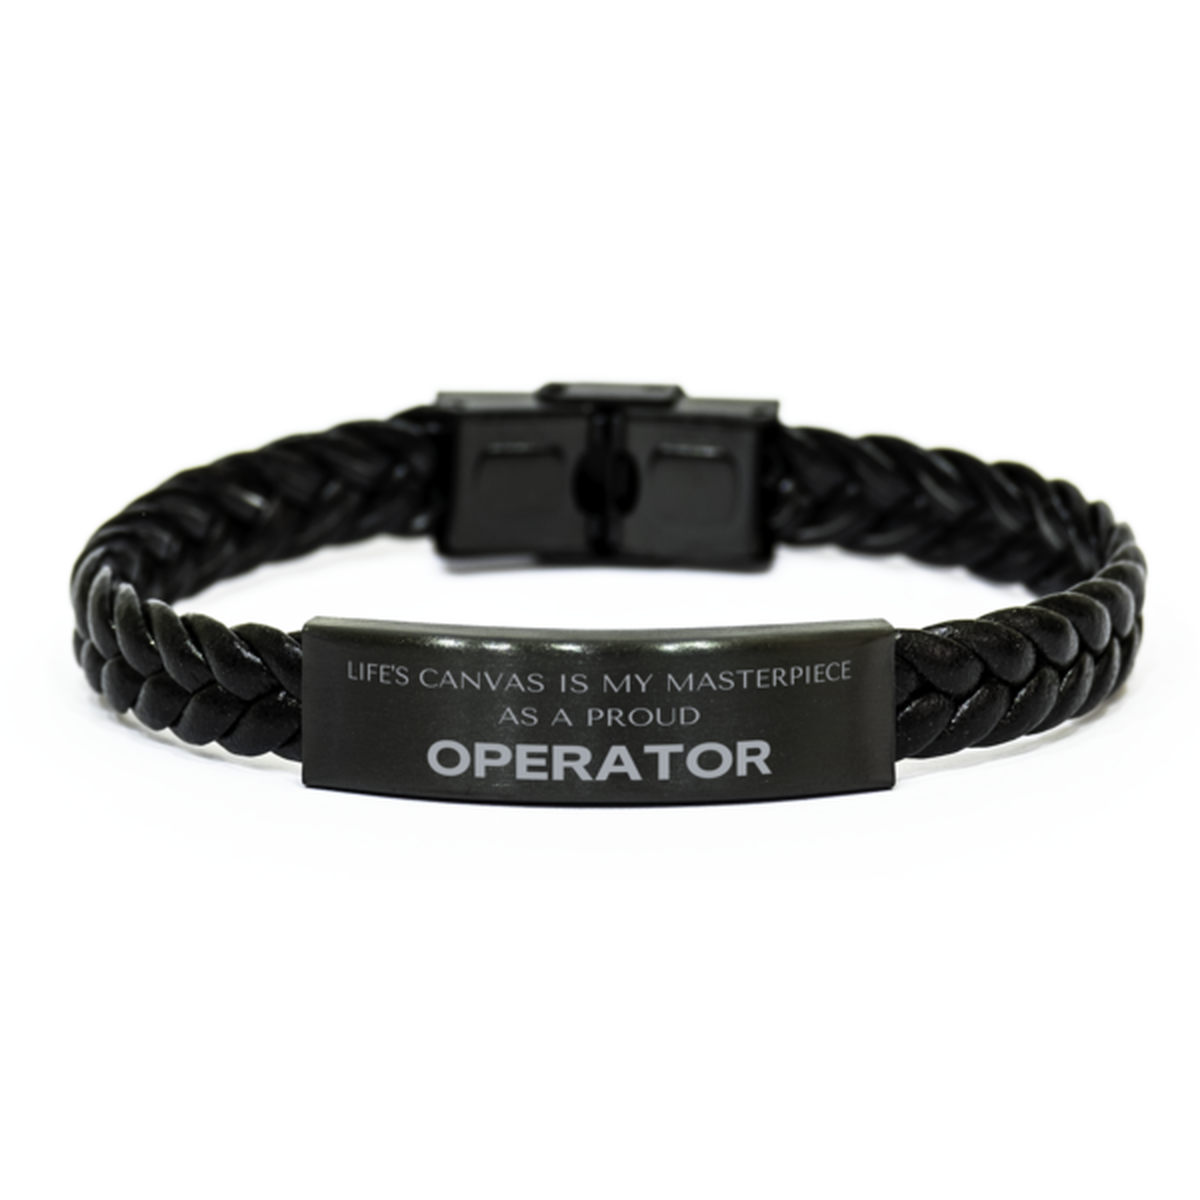 Proud Operator Gifts, Life's canvas is my masterpiece, Epic Birthday Christmas Unique Braided Leather Bracelet For Operator, Coworkers, Men, Women, Friends